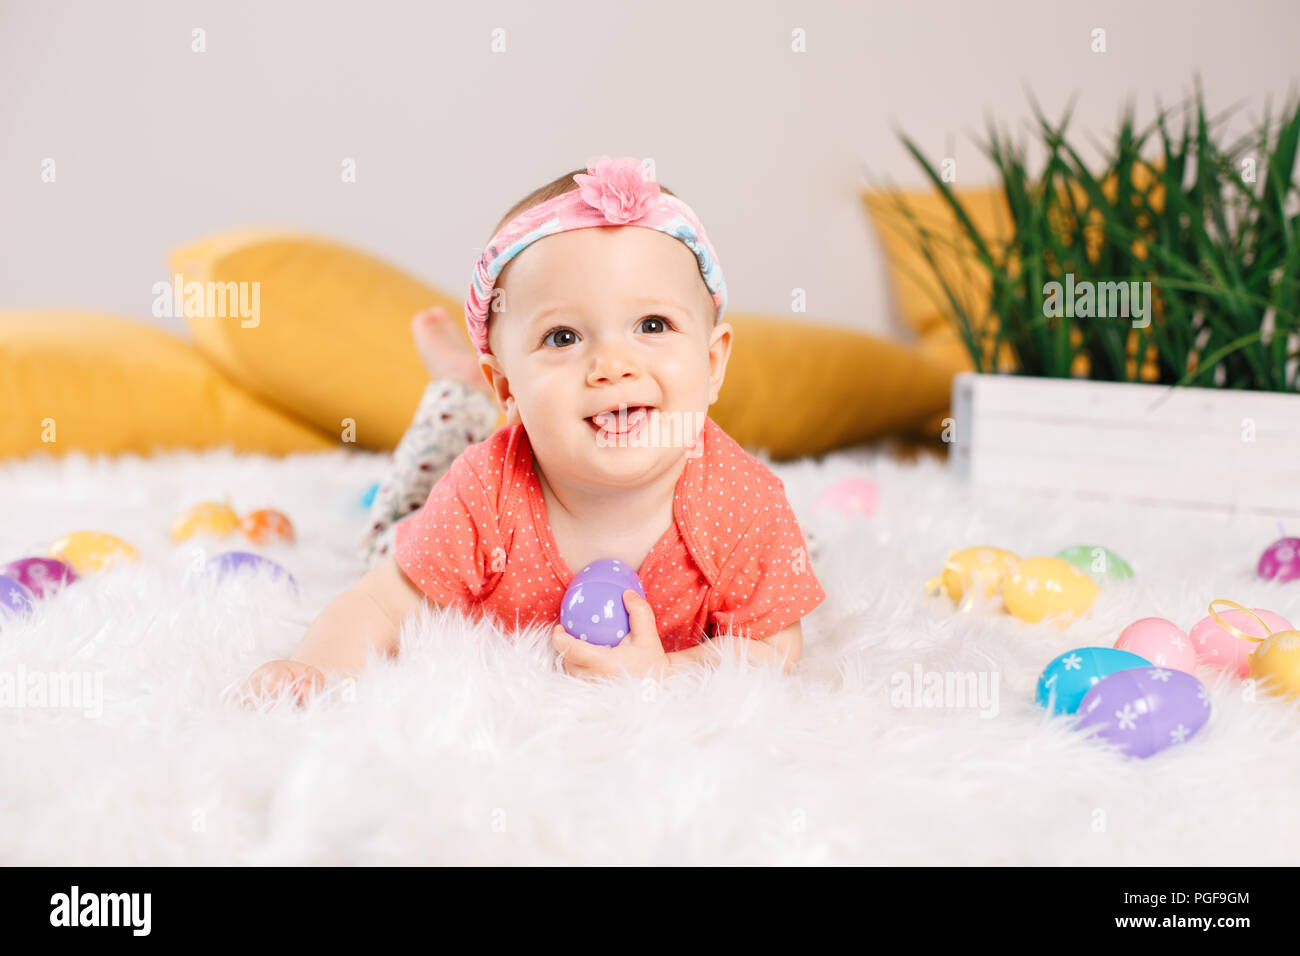 Cute adorable Caucasian baby girl in red onesie t-shirt sitting on ...